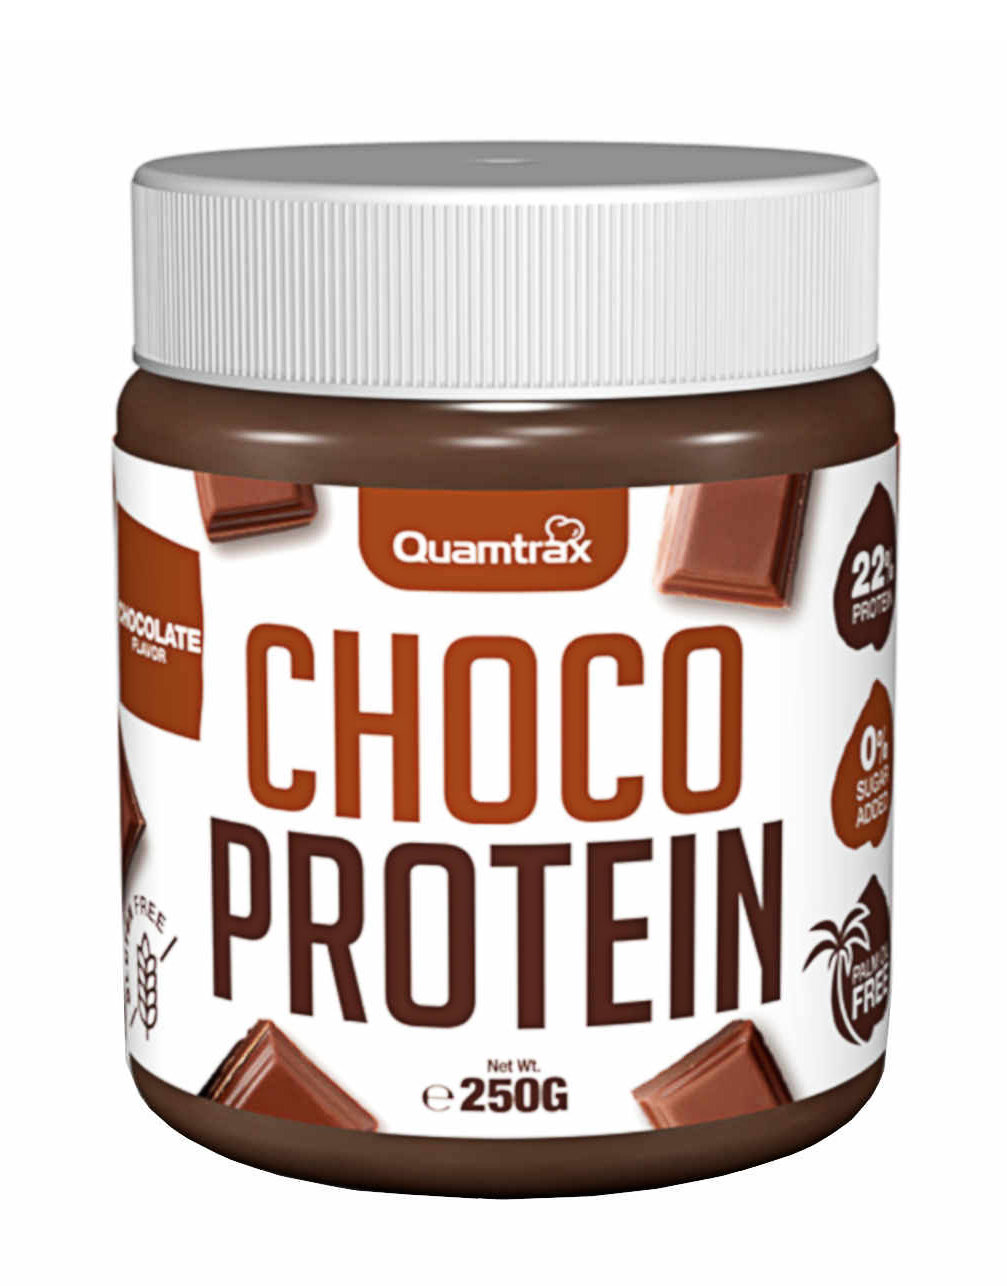 Choco паста. Quamtrax Nutrition пасты. Чоко паста. Protein Choco. Протеин Quamtrax Nutrition.